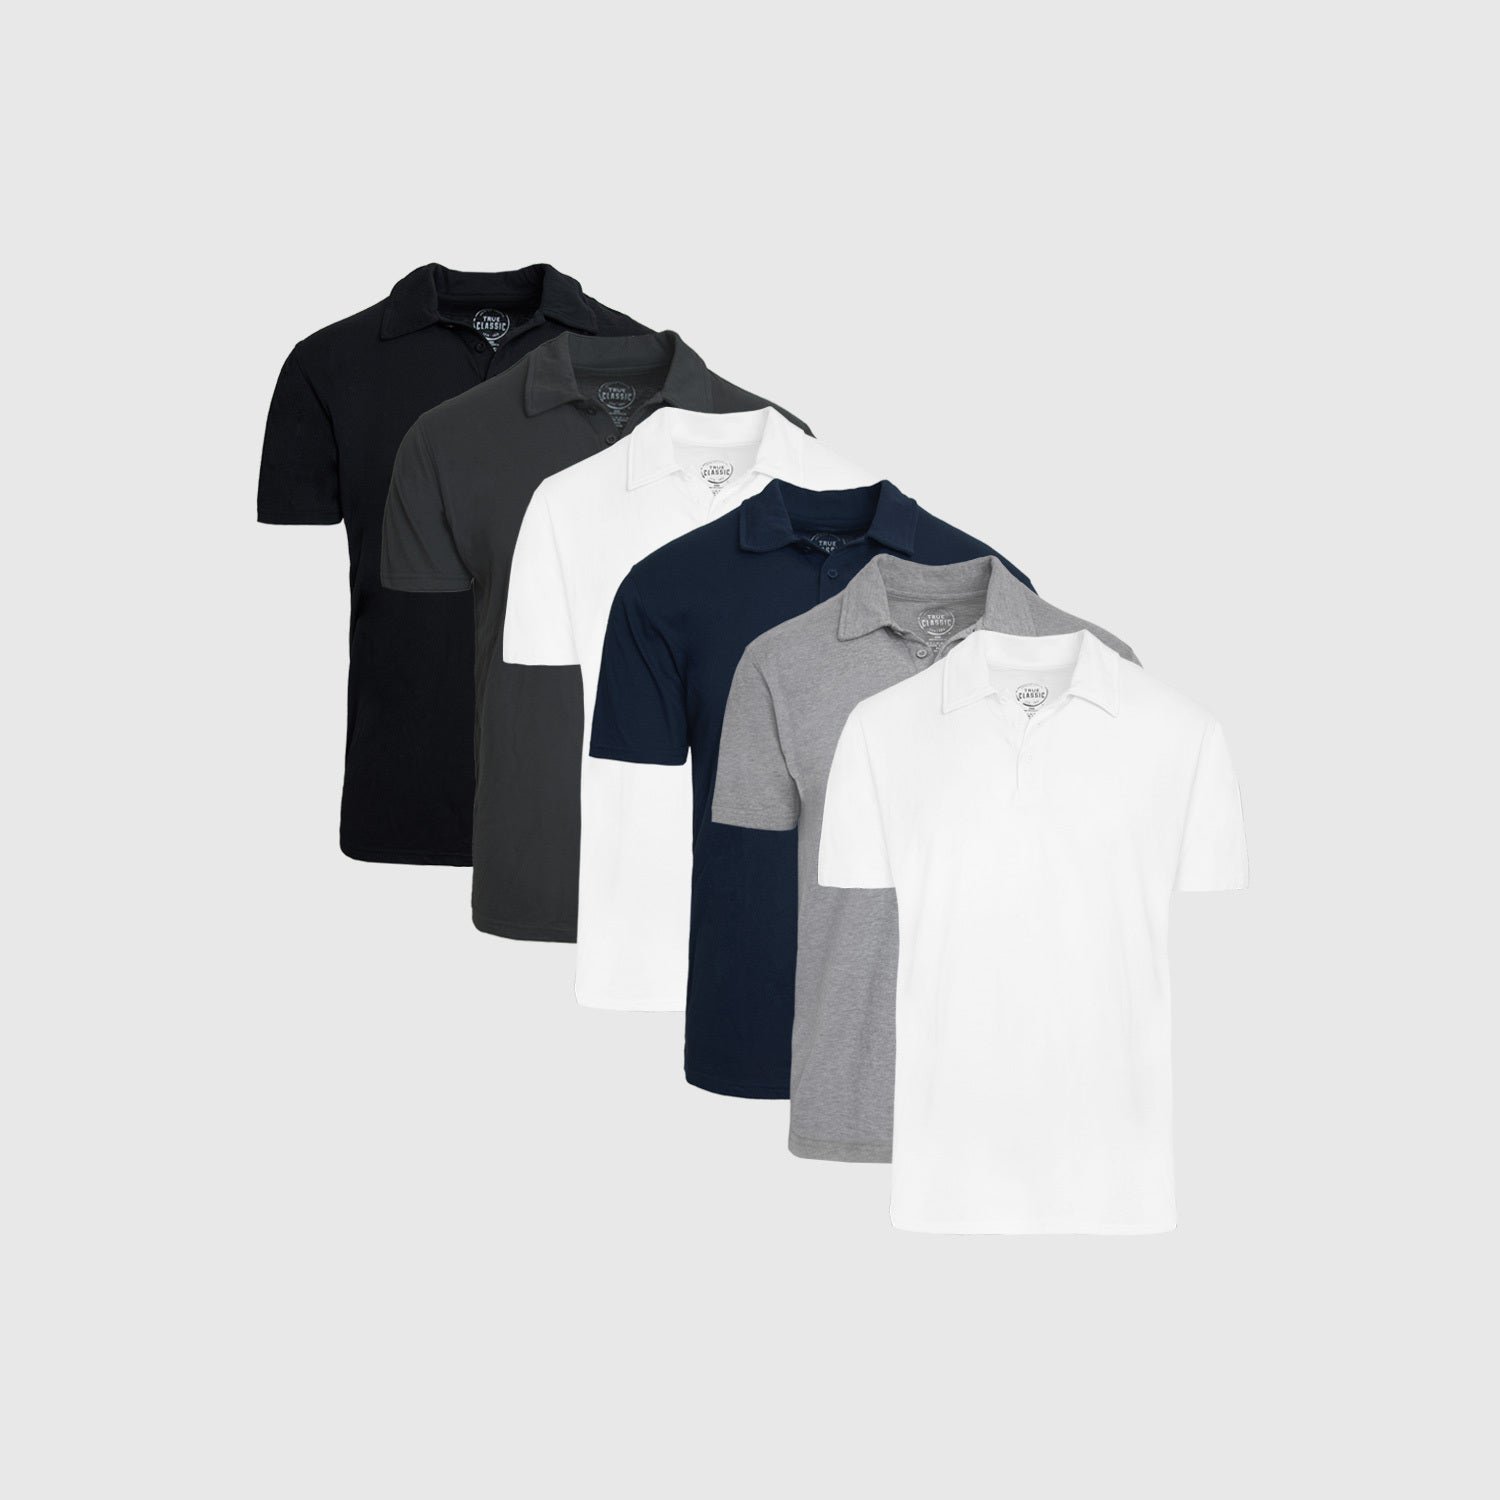 The Basic Polo 6-Pack